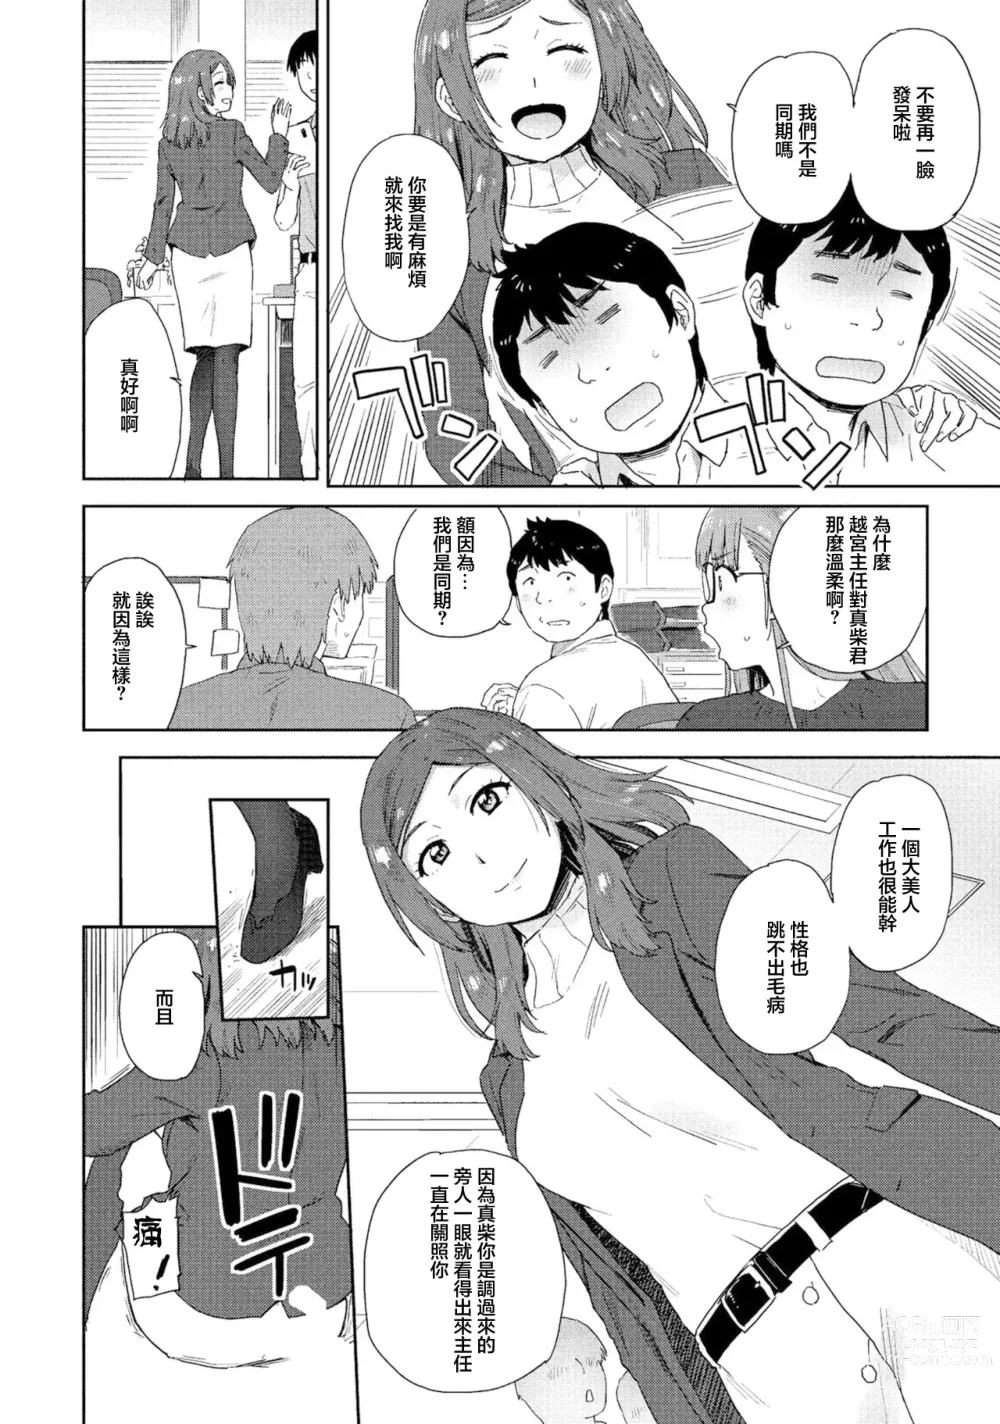 Page 2 of doujinshi 可靠依賴性